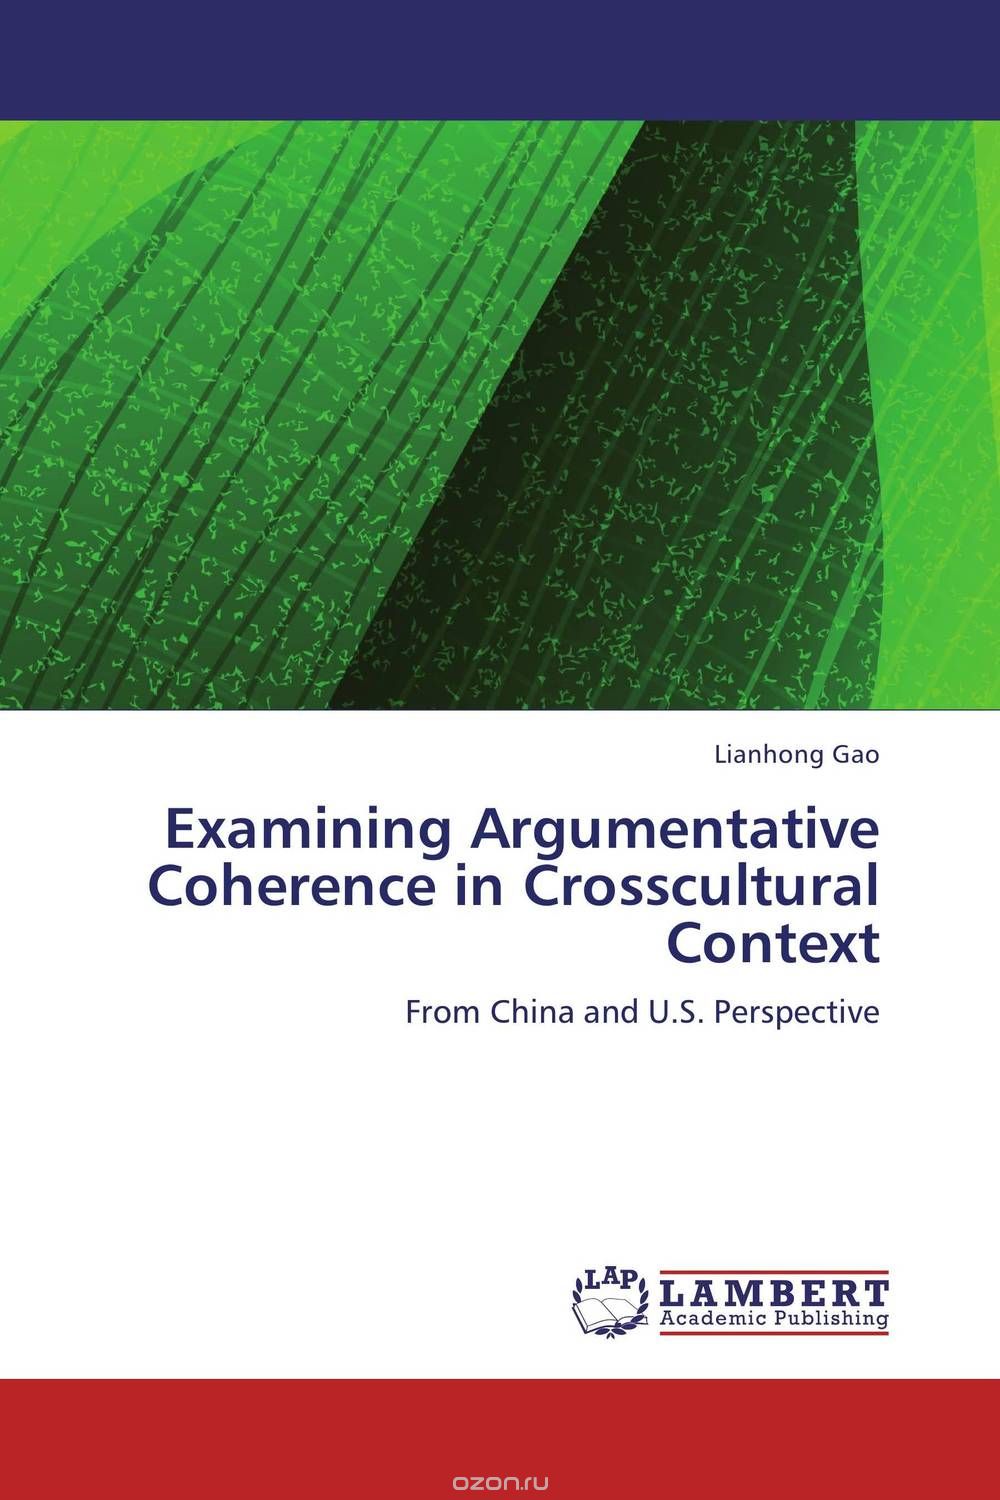 Examining Argumentative Coherence in Crosscultural Context